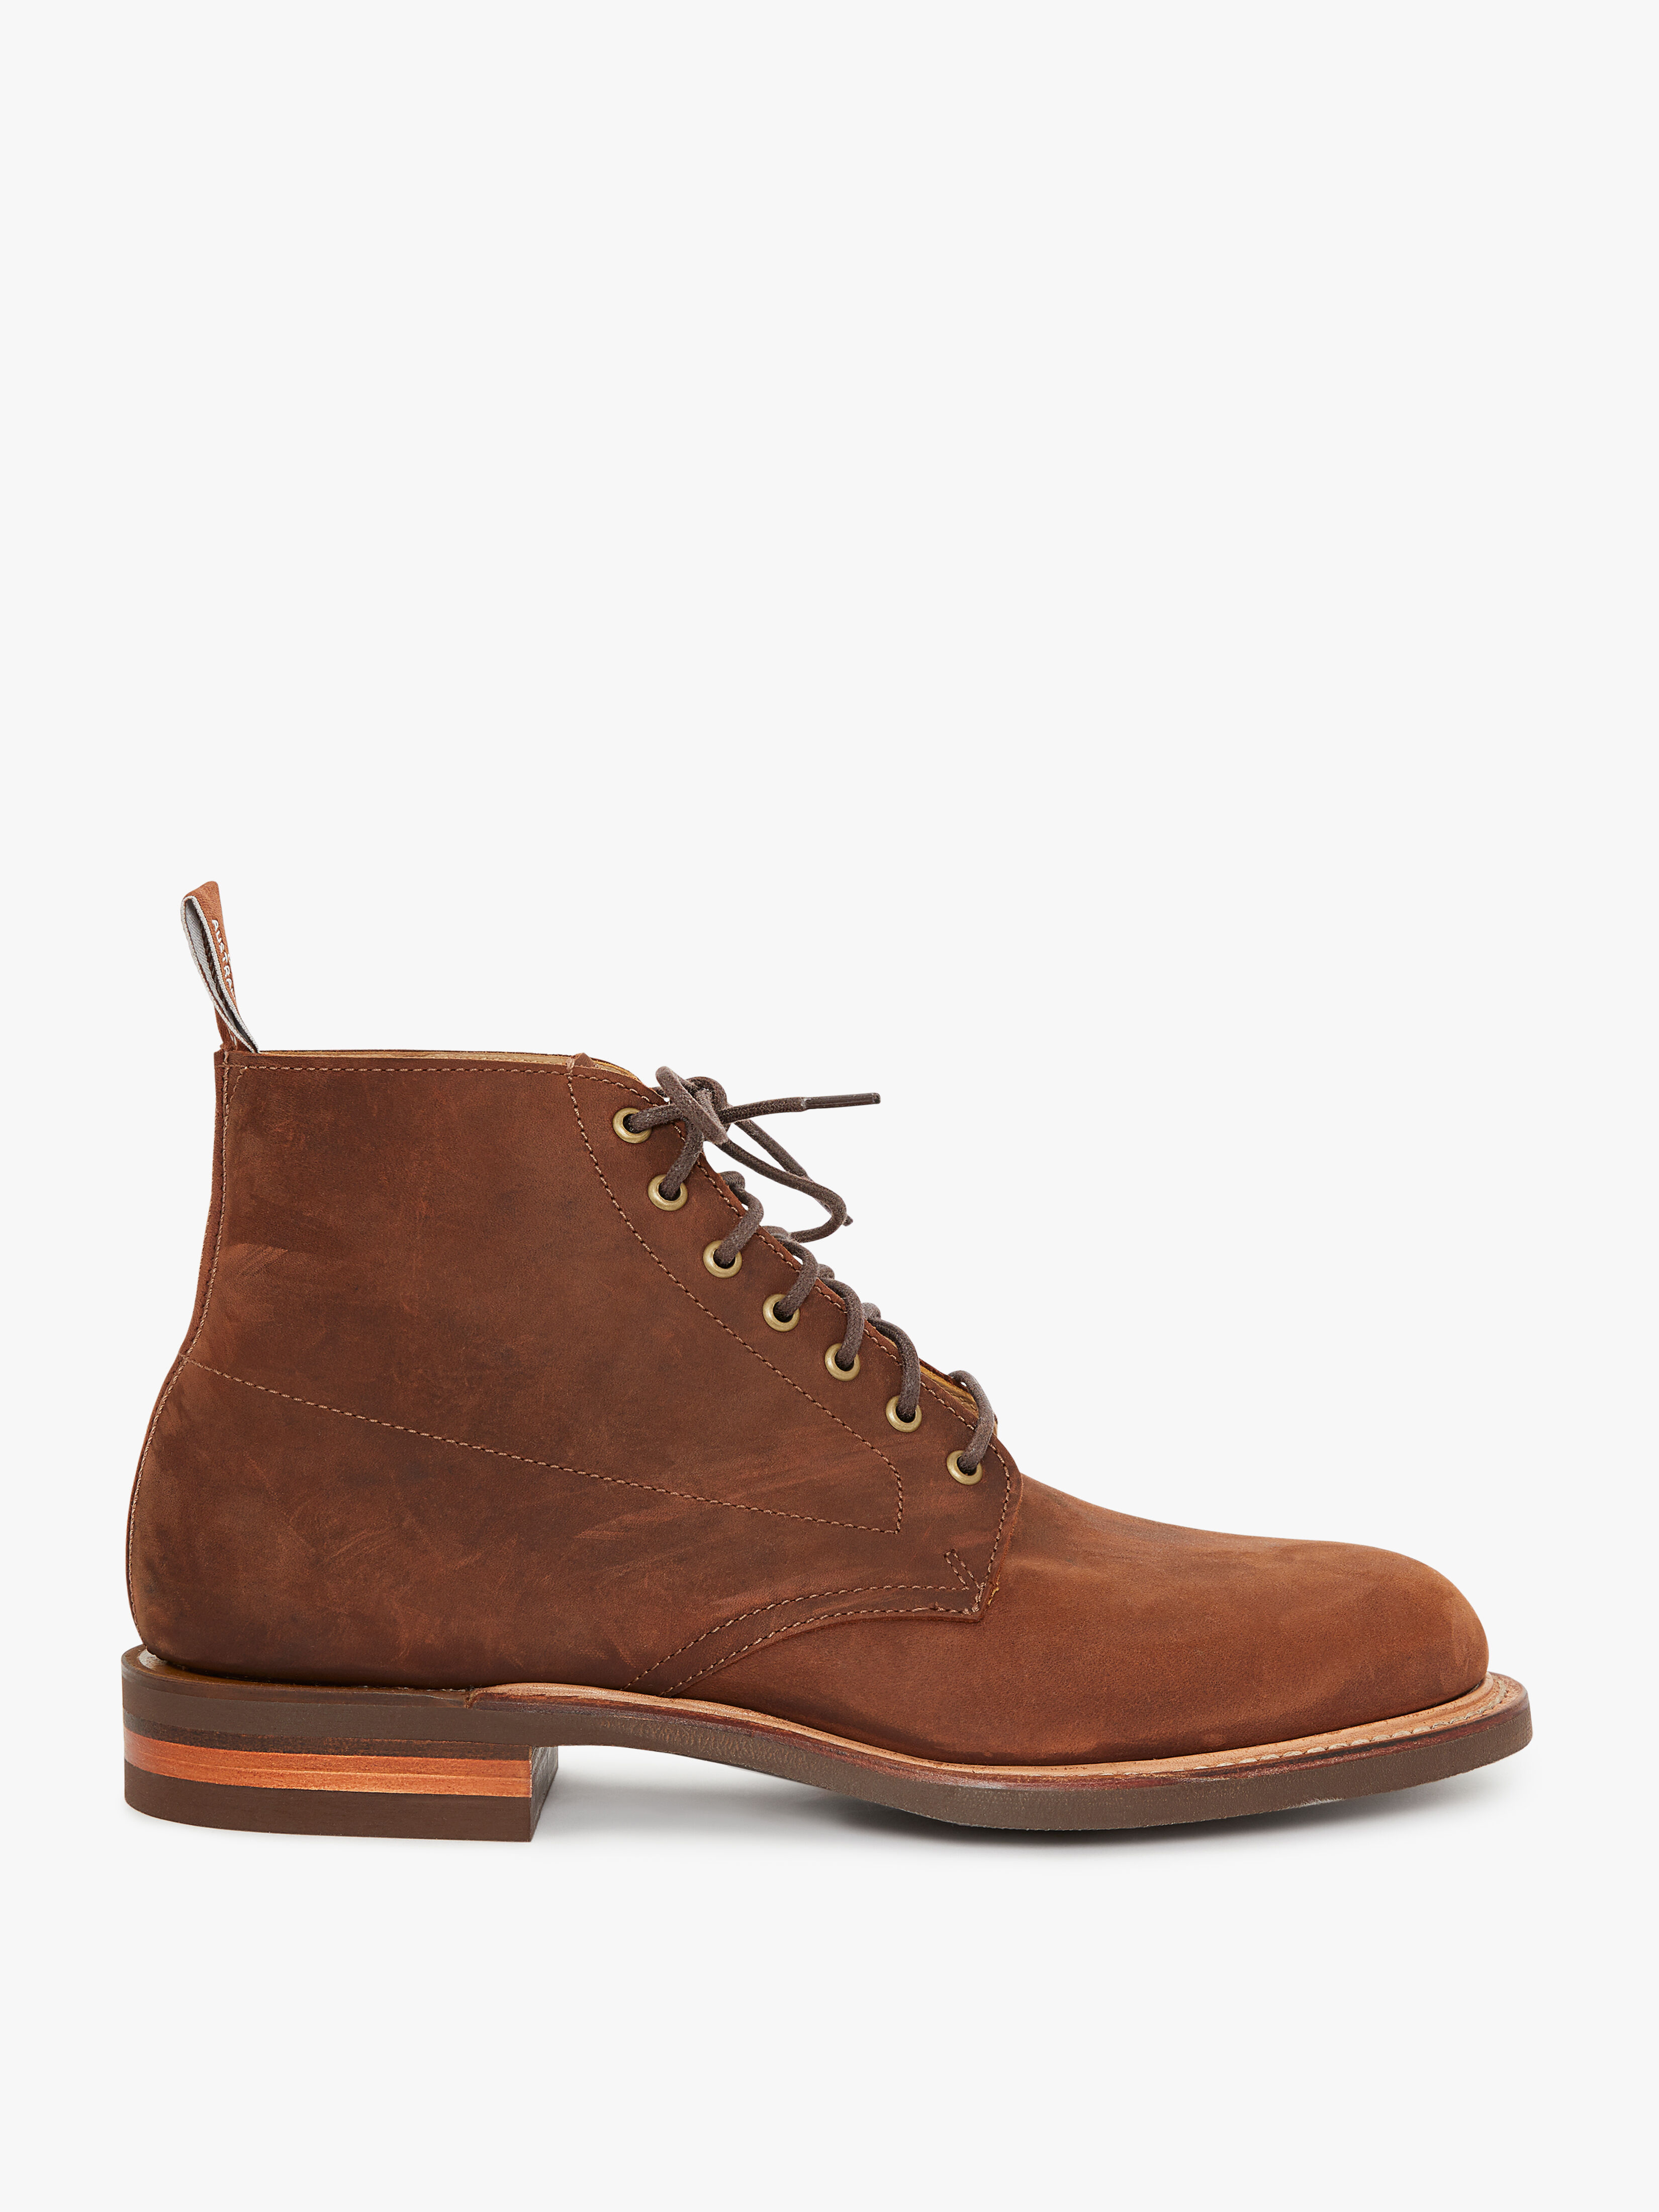 rm williams boots lace up